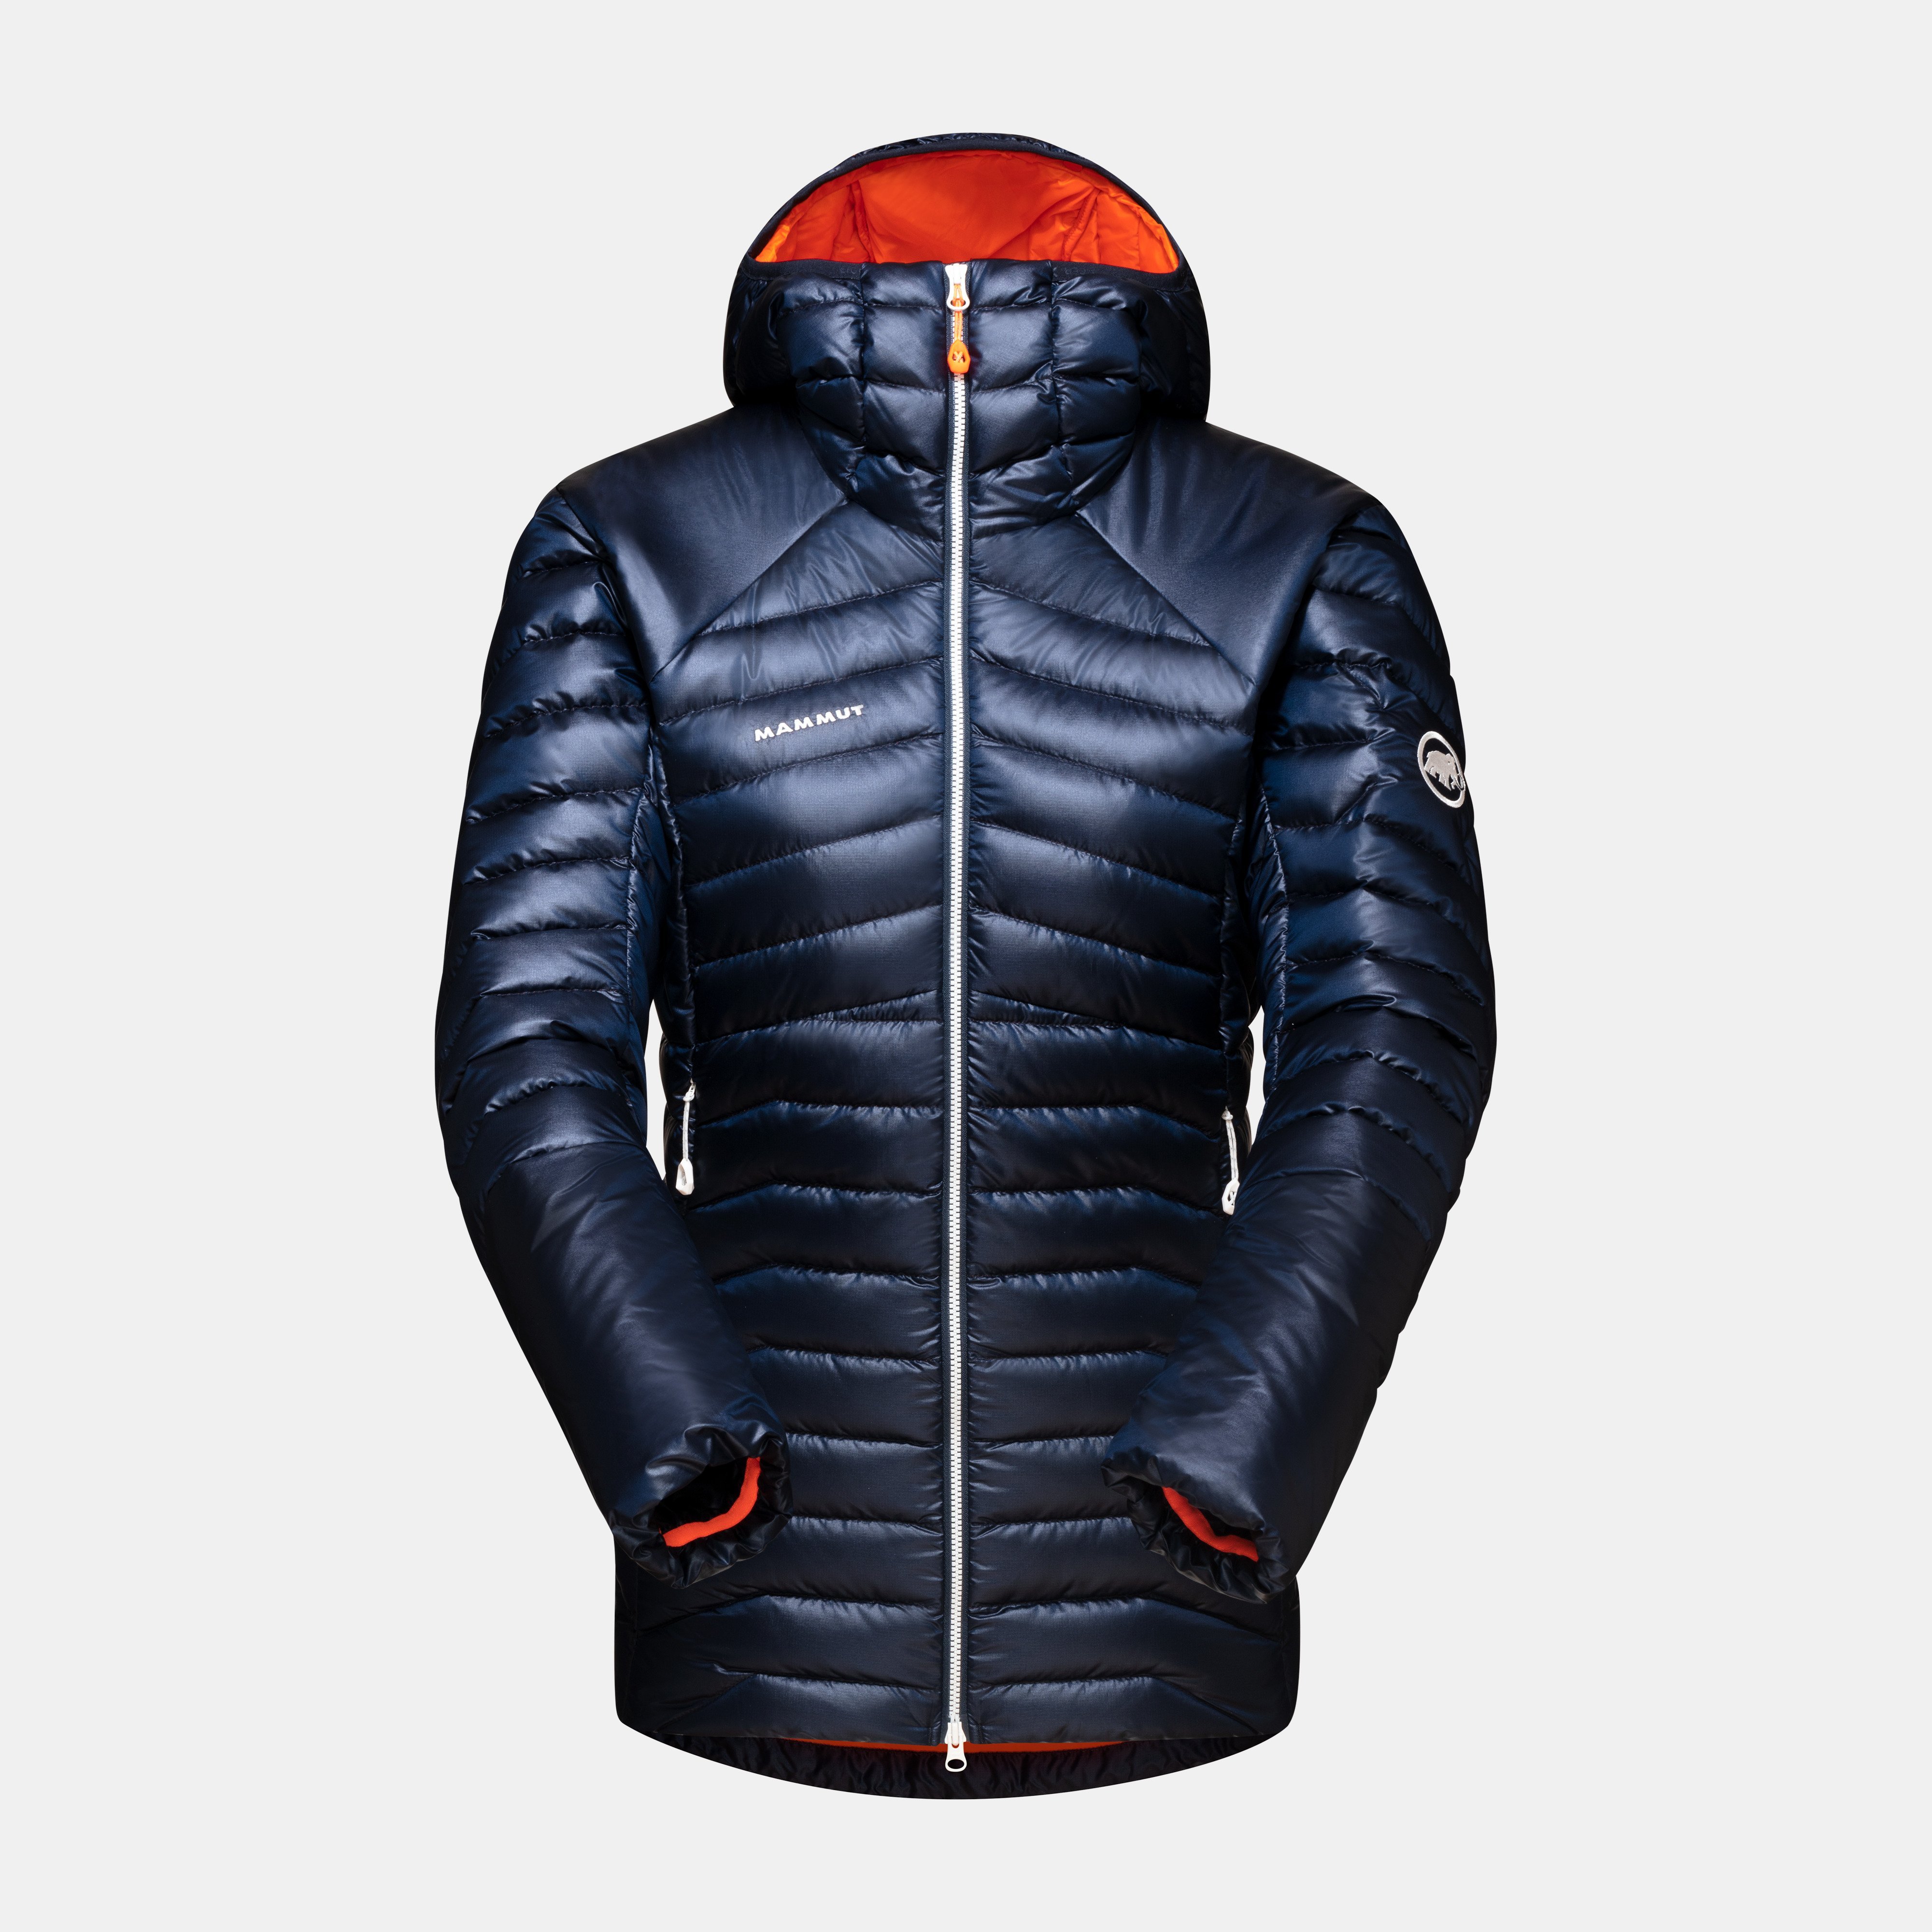 Unlock Wilderness' choice in the North Face Vs Mammut comparison, the Eigerjoch Advanced IN Hooded Jacket by Mammut